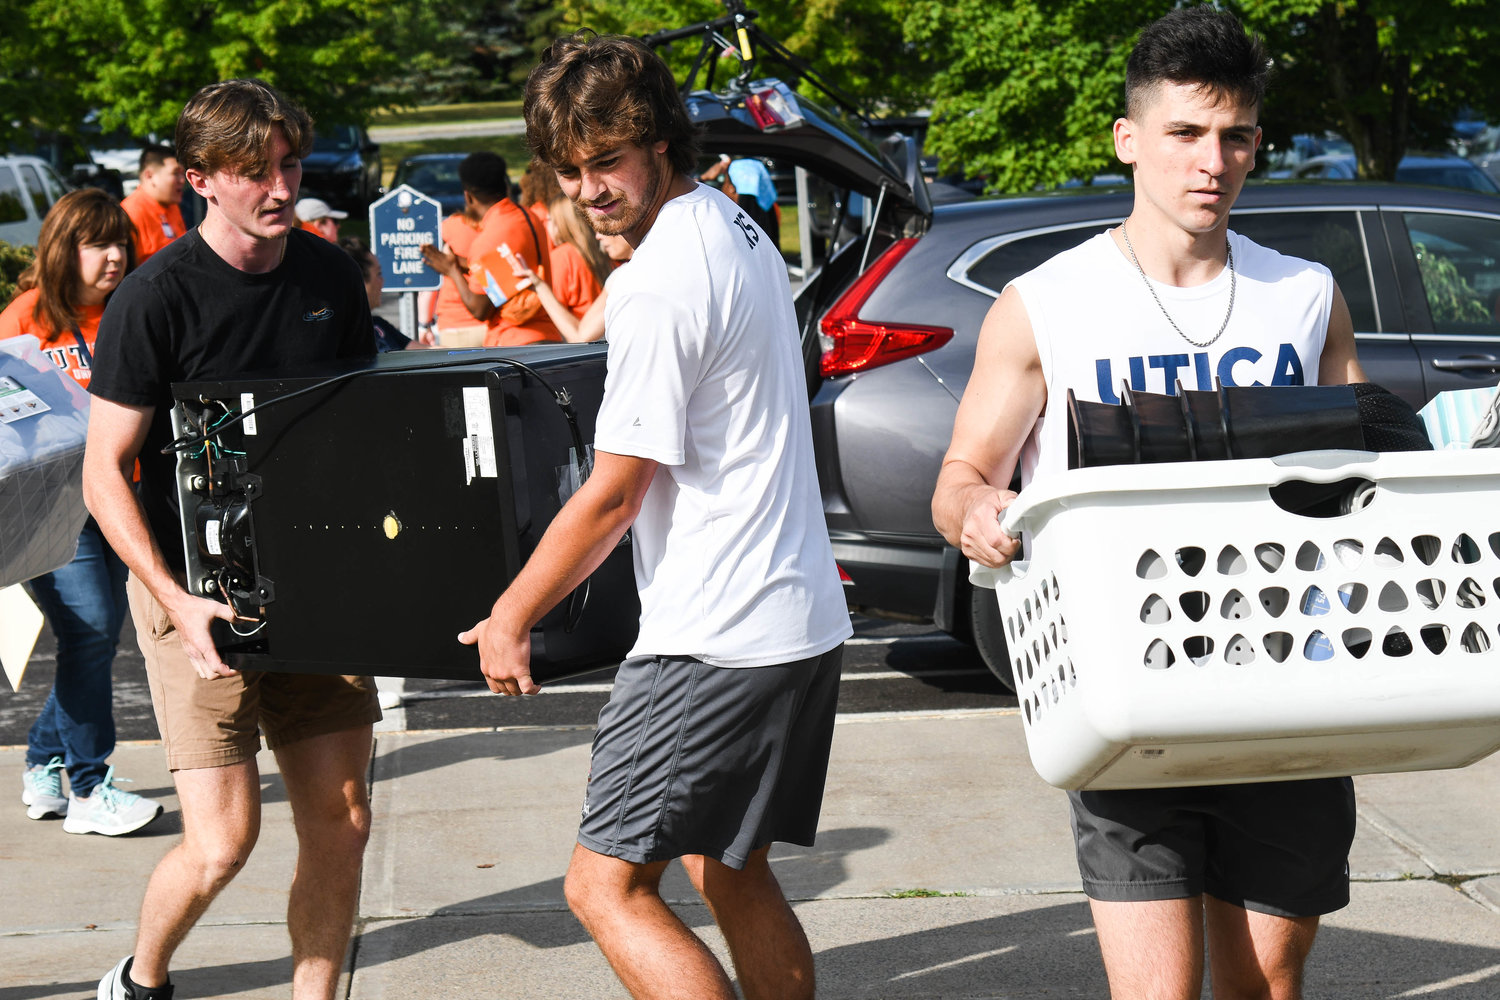 Current students help Utica University’s Class of 2026 move into their dorms on Tuesday.